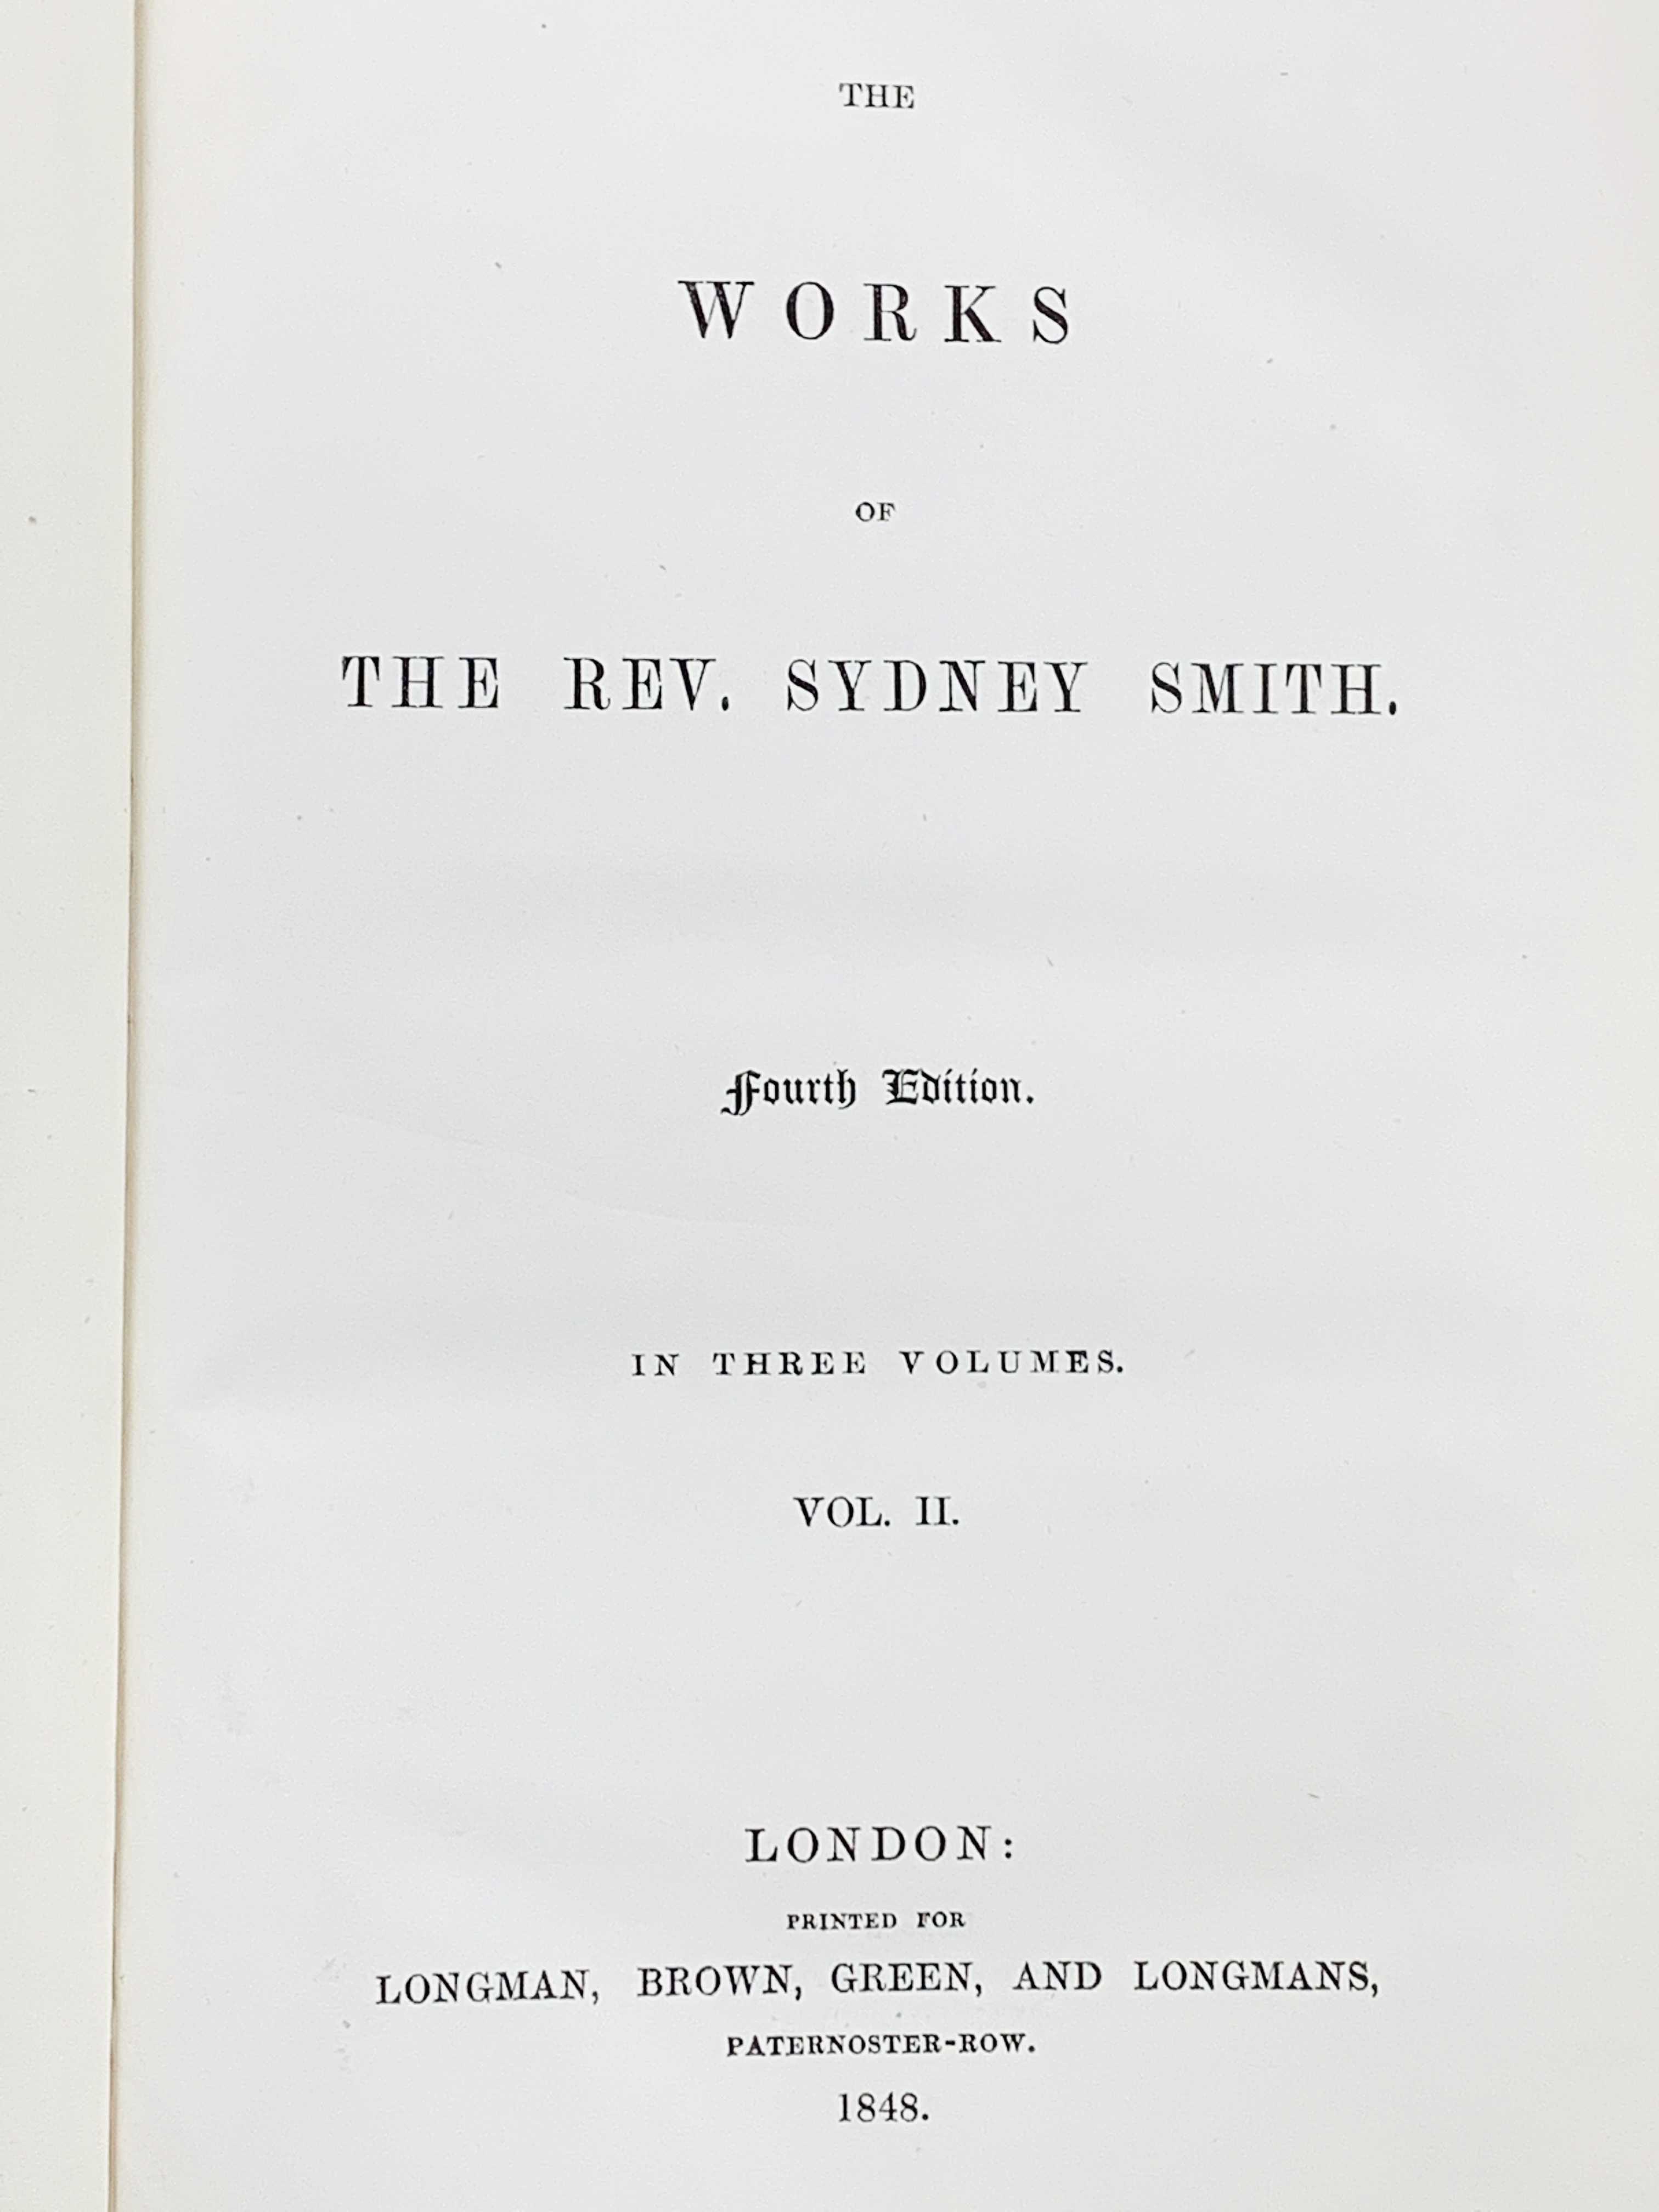 "The Works of the Rev. Sydney Smith", 1848 - Image 2 of 3